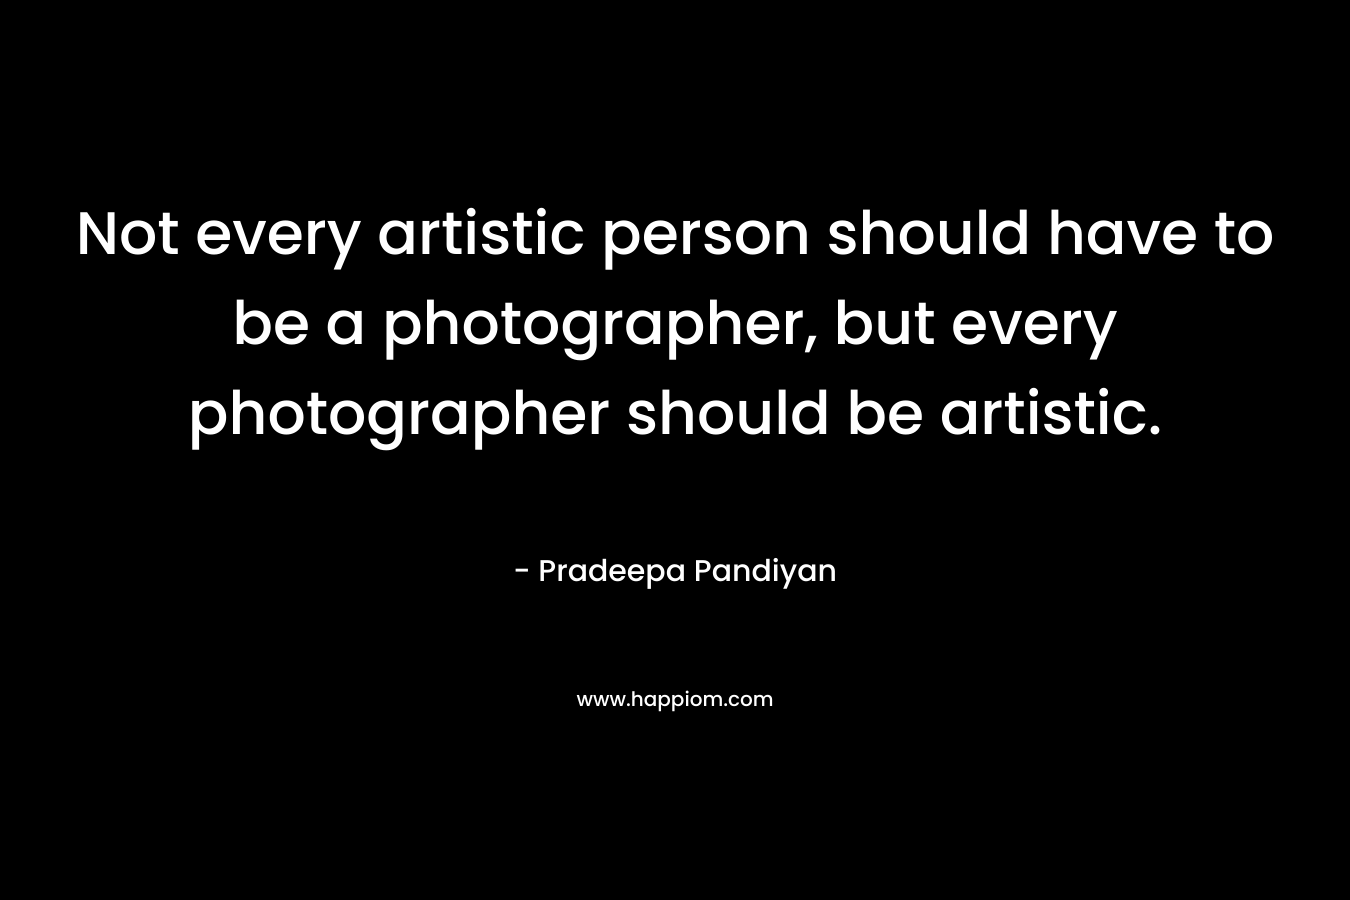 Not every artistic person should have to be a photographer, but every photographer should be artistic.